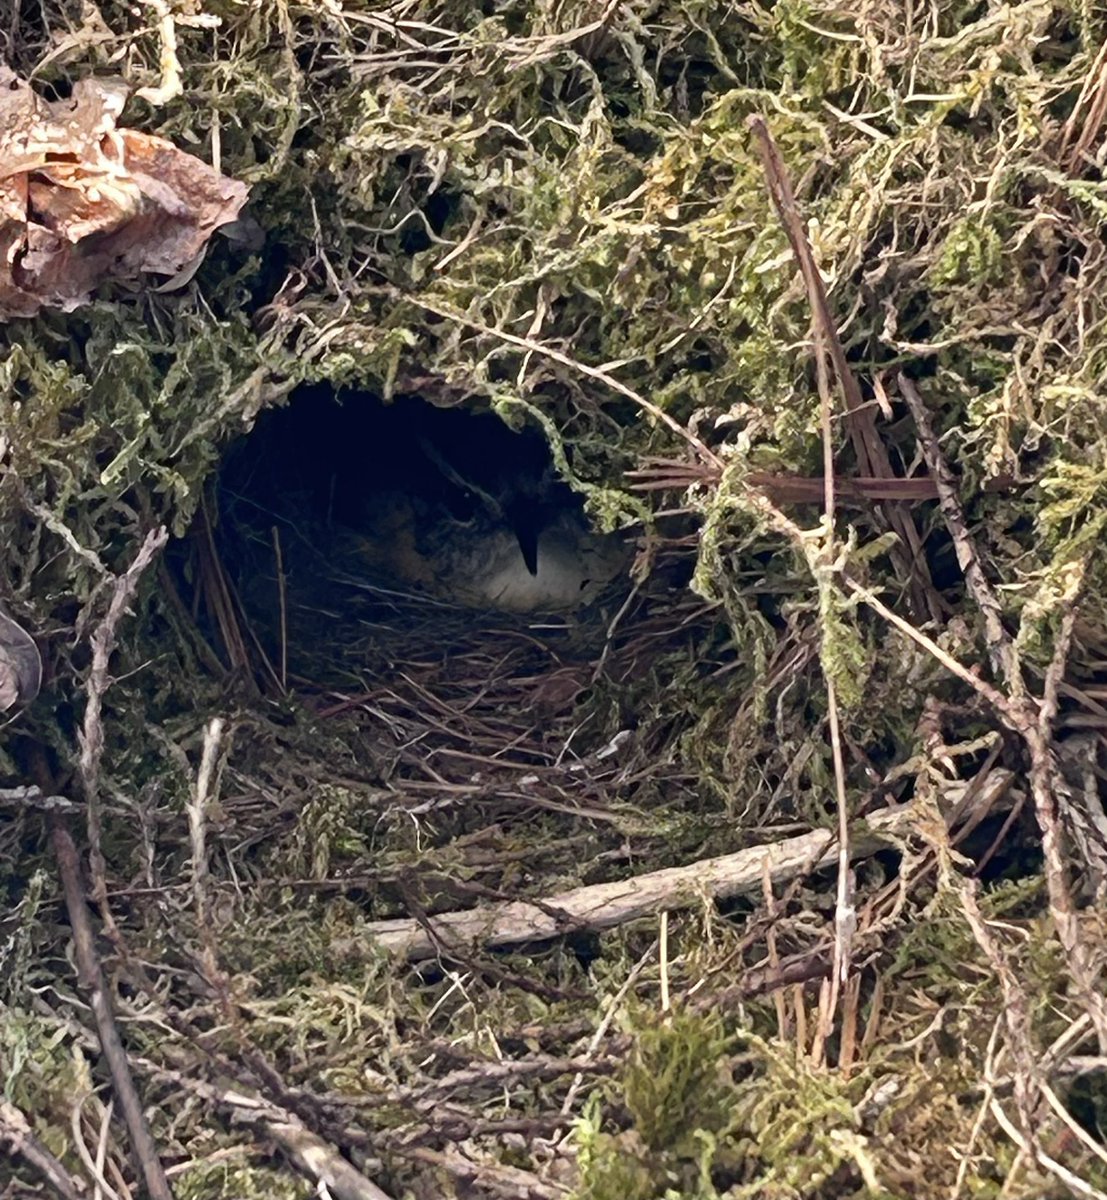 #Birds are so smart. Look inside this #nest in my front #flower box . Ma #Carolina #Wren incubating her eggs this afternoon. Total cuteness I tell you. #birdwatching #birders #nesting #spring #nature